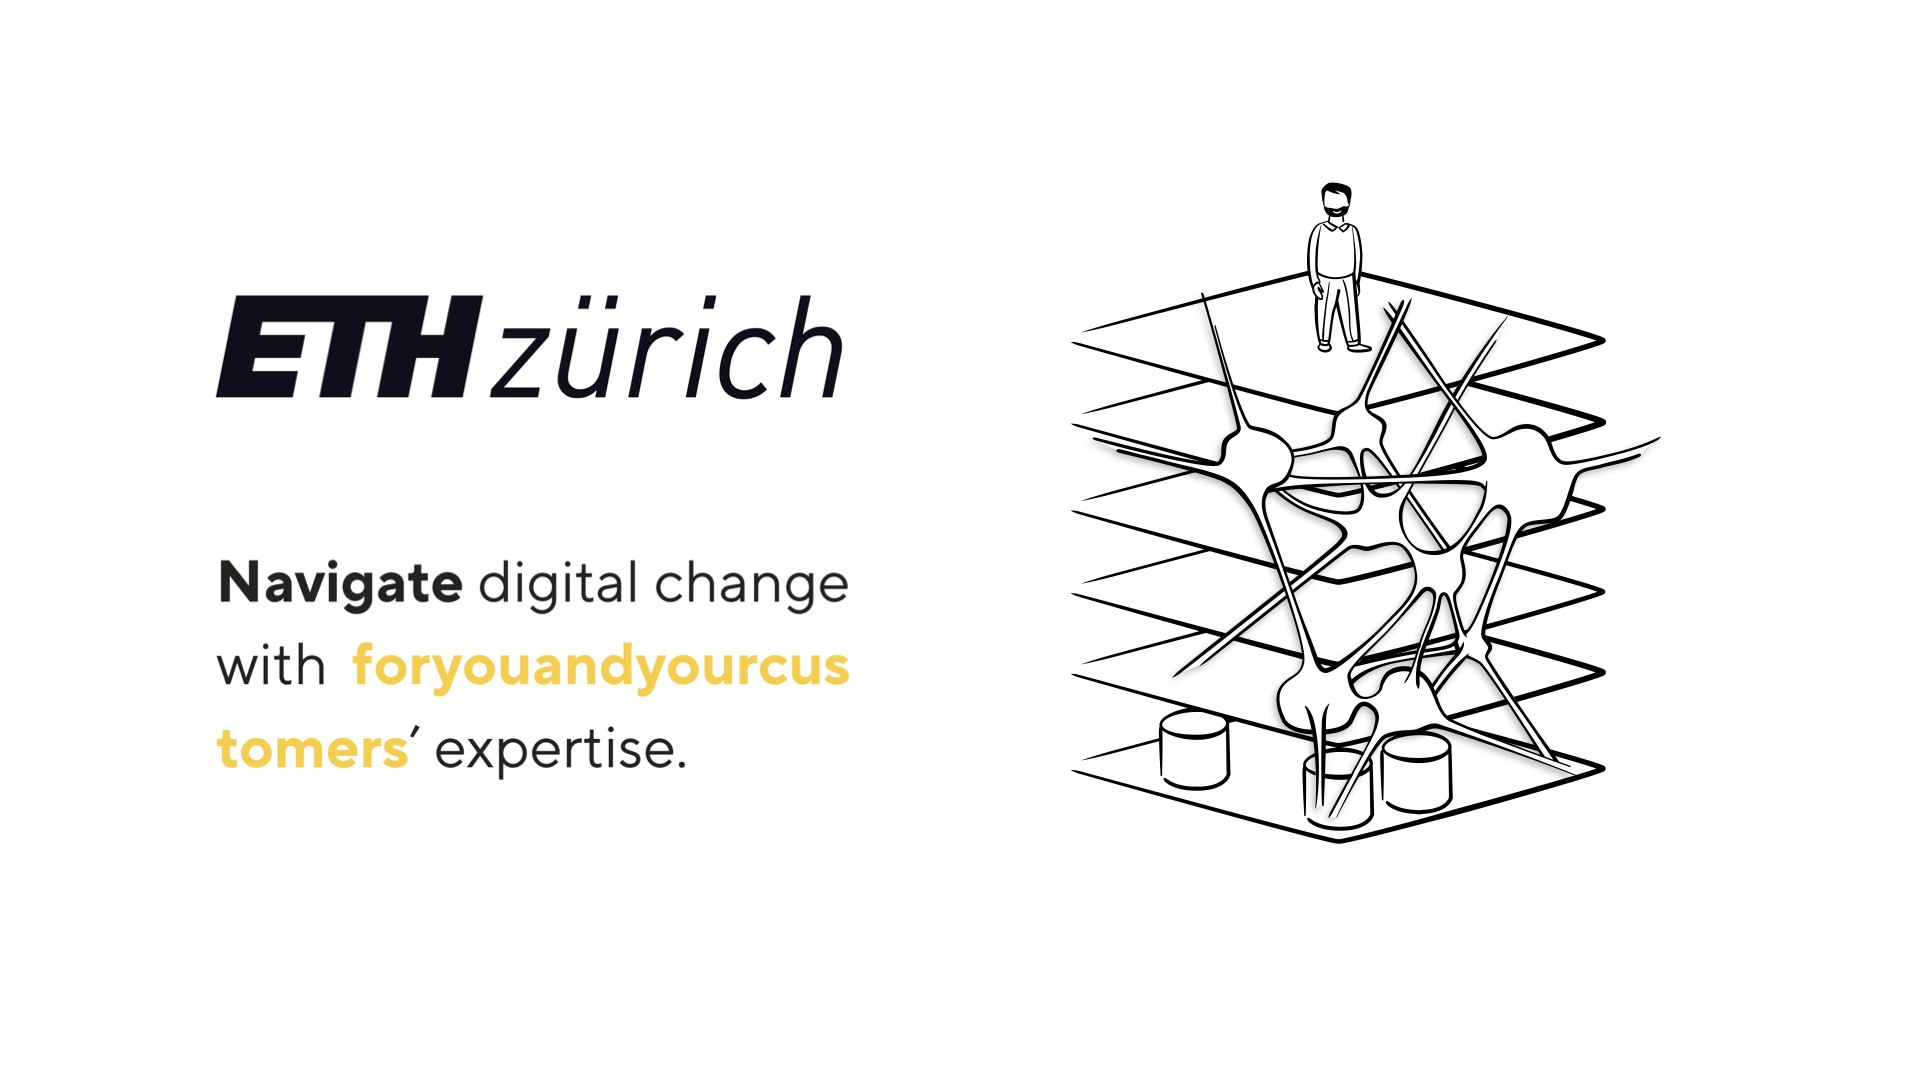 Partnering together: IVIA at ETH Zurich and foryouandyourcustomers are Pioneering the Use of AI in the Visualization of Natural Language Data.